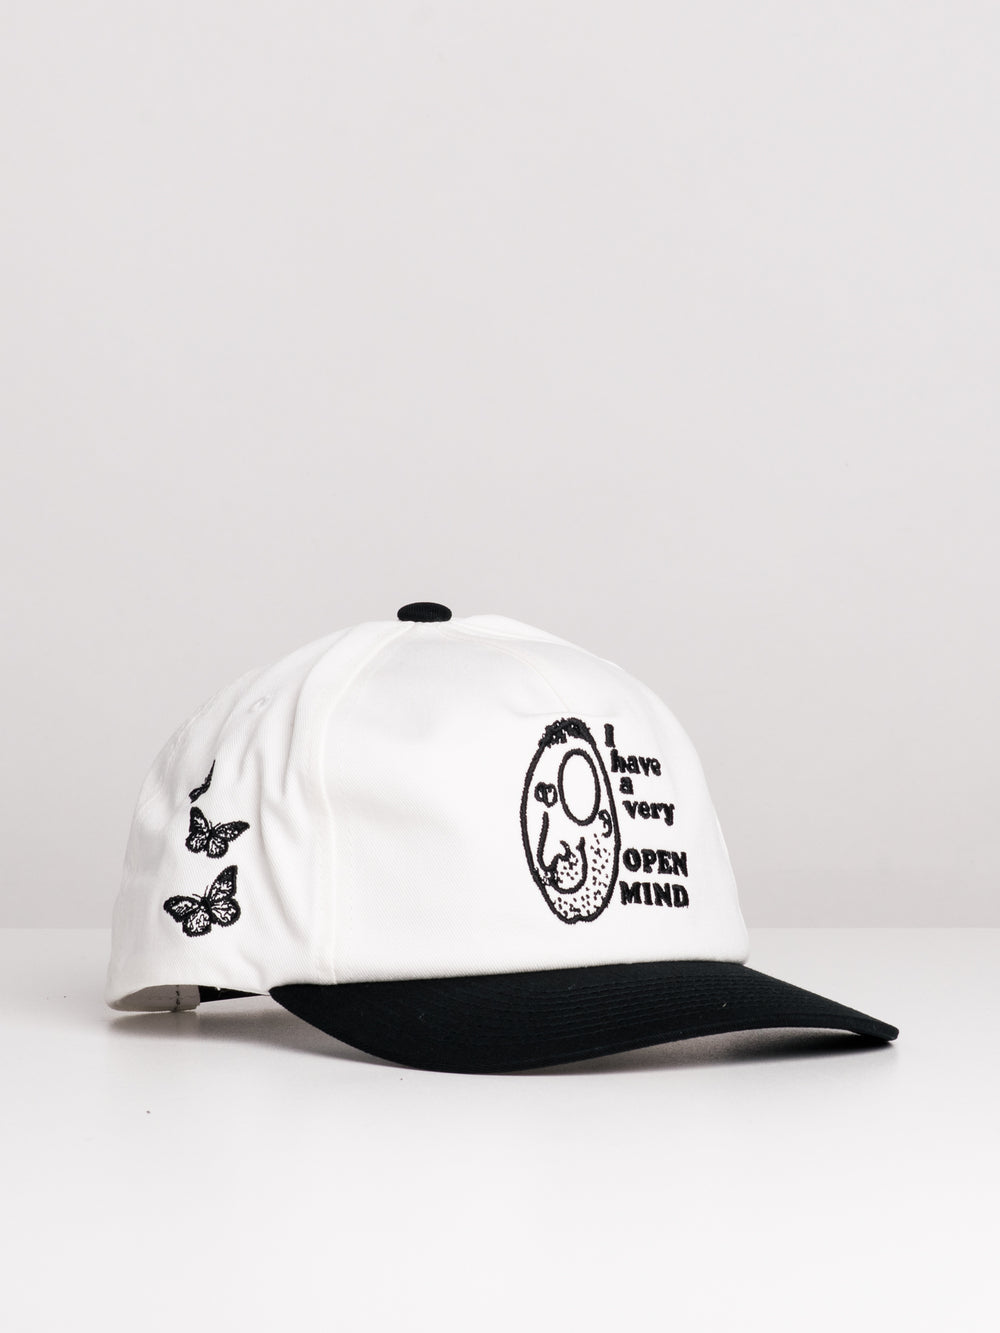 OBEY OPEN MIND SNAPBACK HAT - WHITE - CLEARANCE